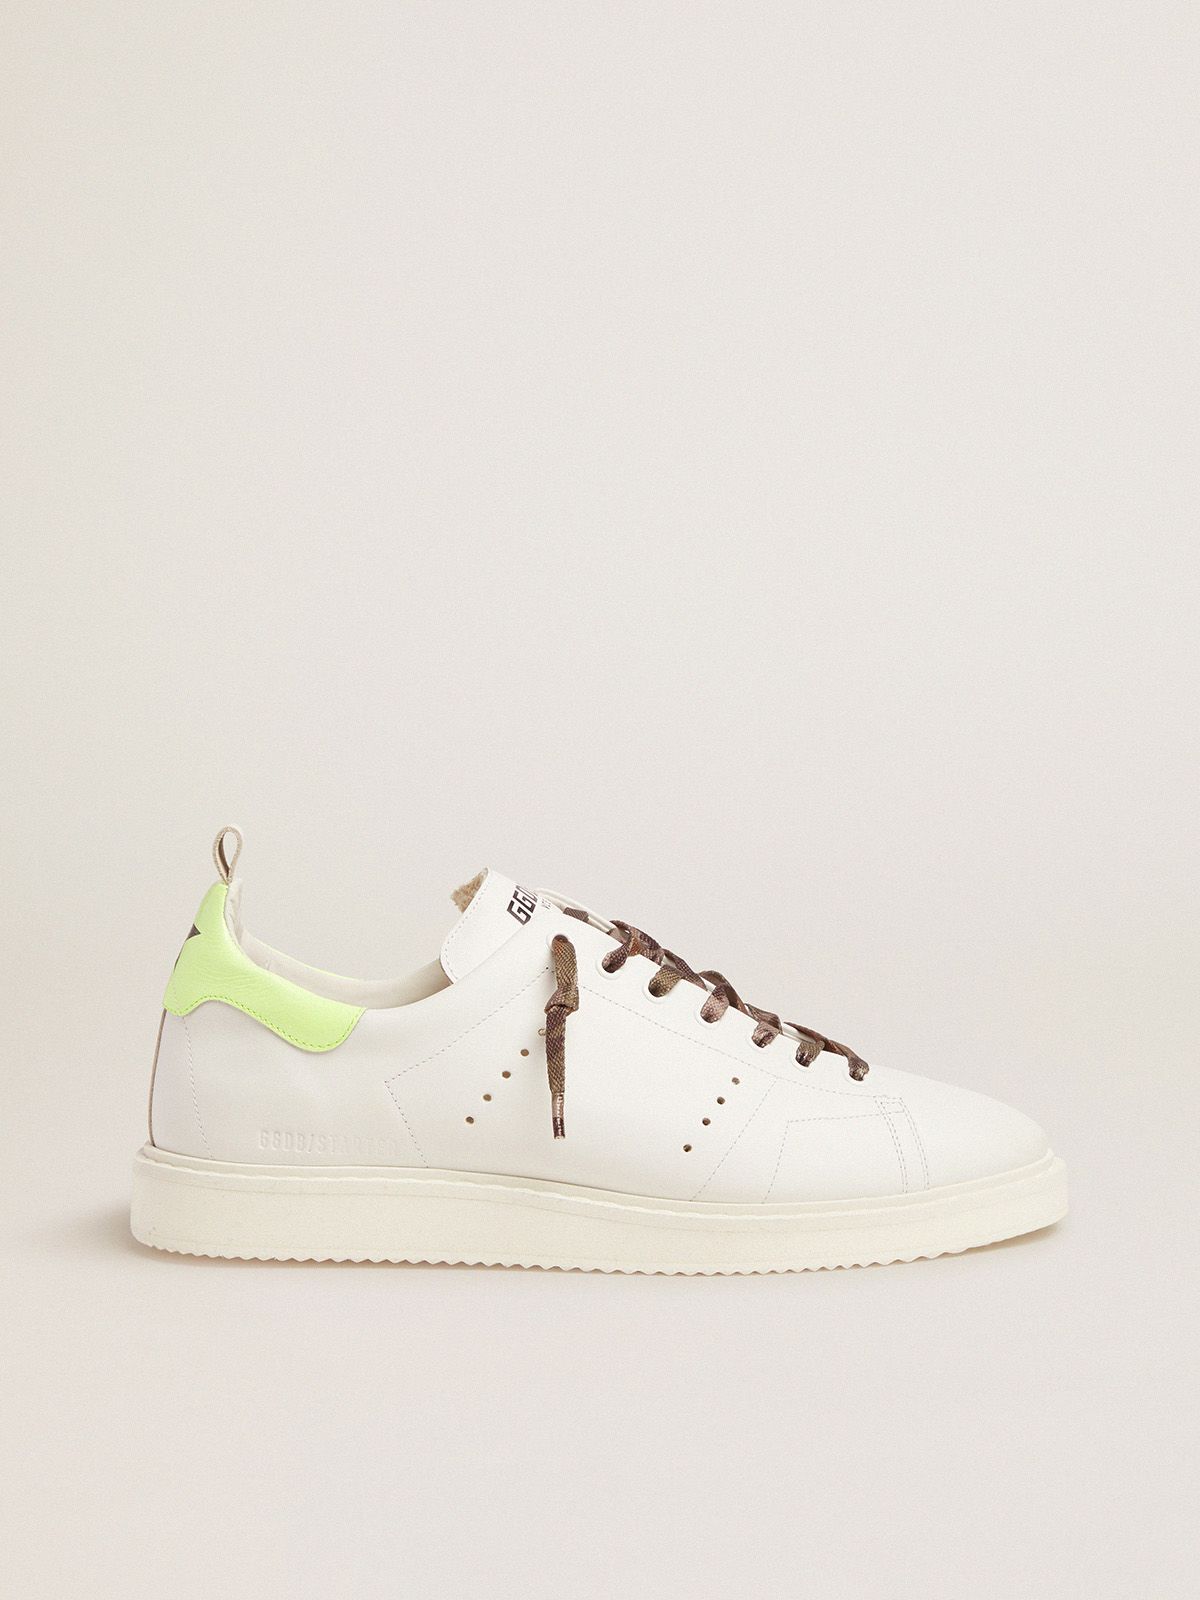 White Starter LTD sneakers with fluorescent yellow heel tab